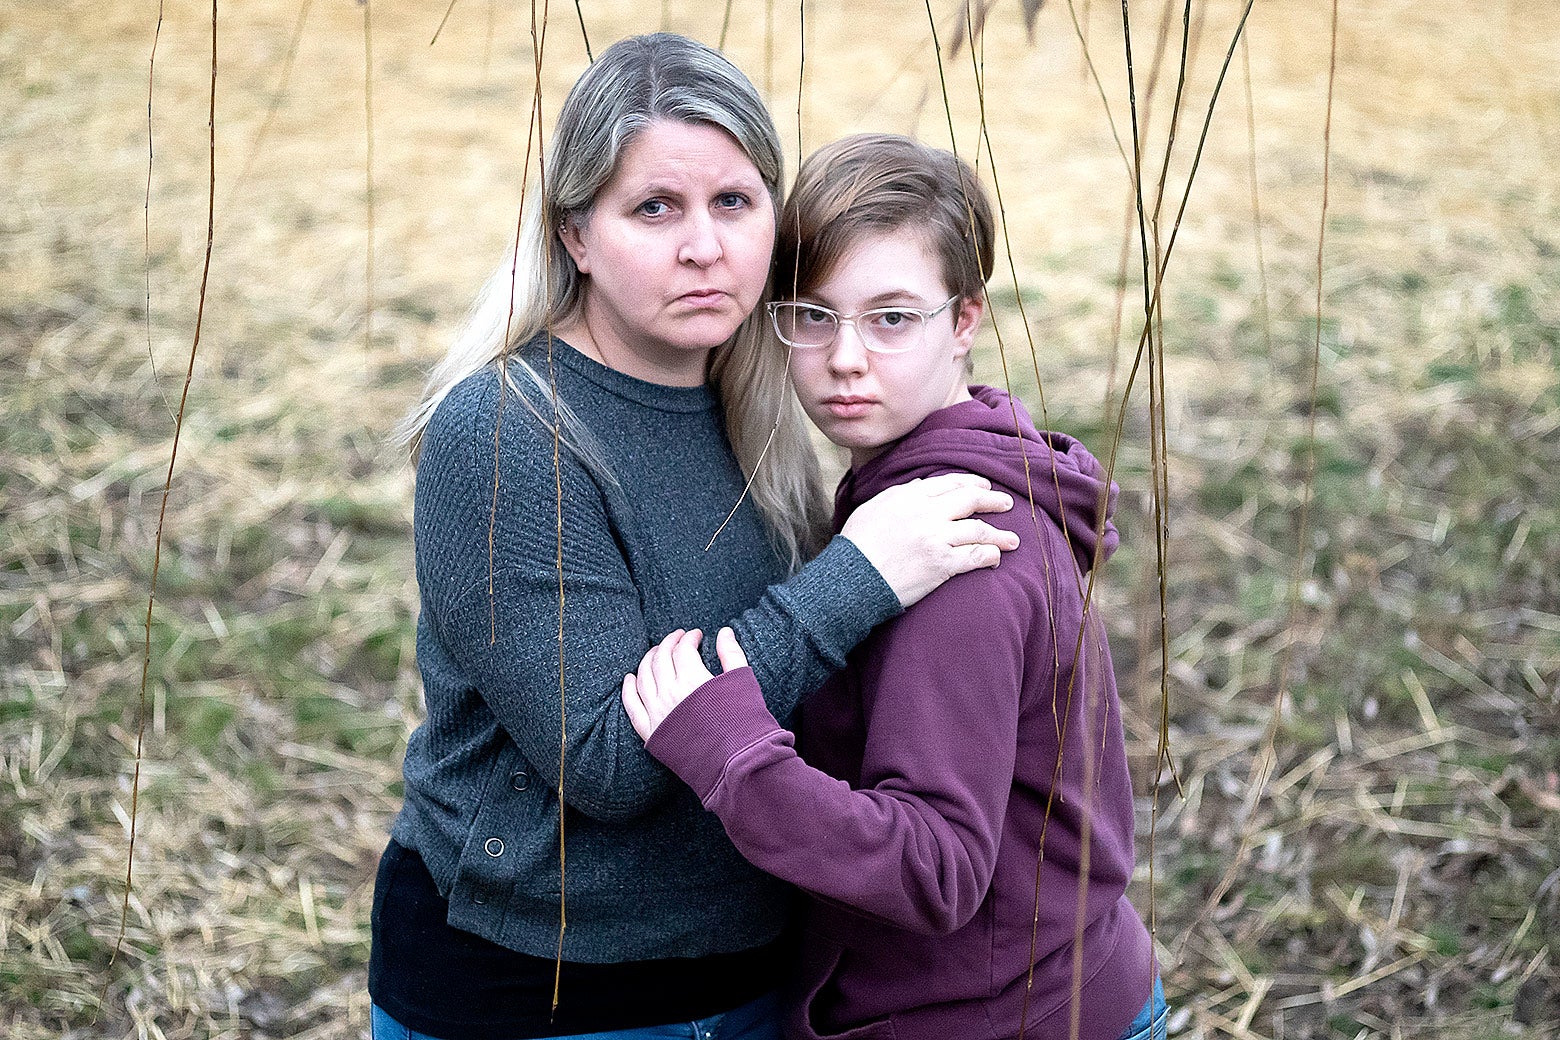 Parents Are Giving Up Custody of Their Children to Save Their Lives